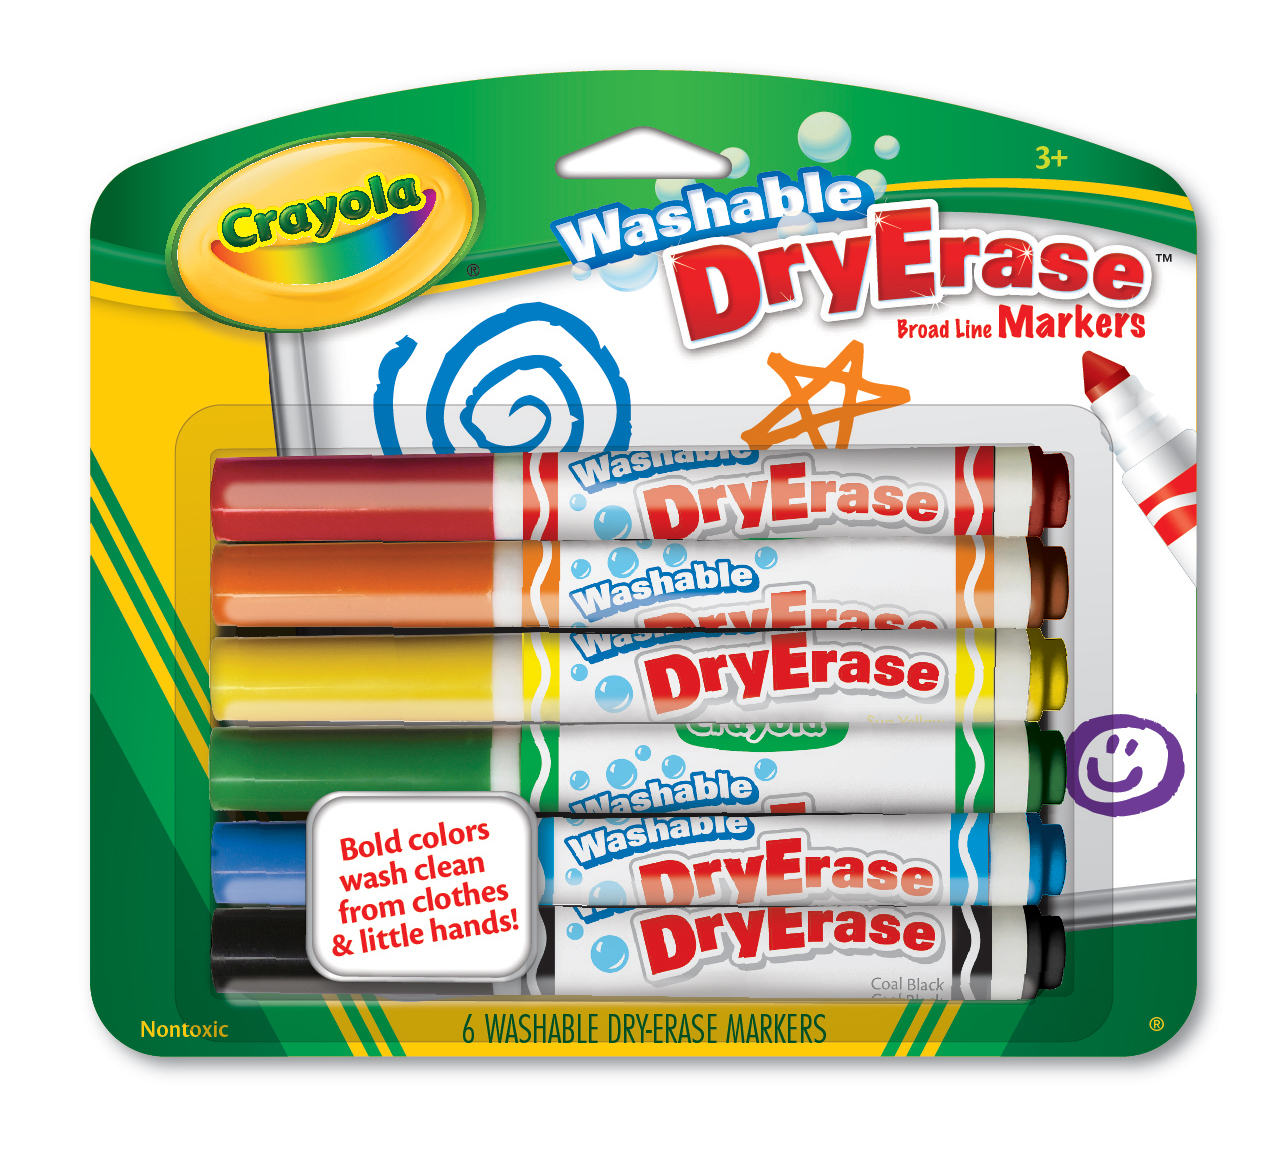 Washable Dry-Erase Broad Line Markers, 6 Count | Crayola